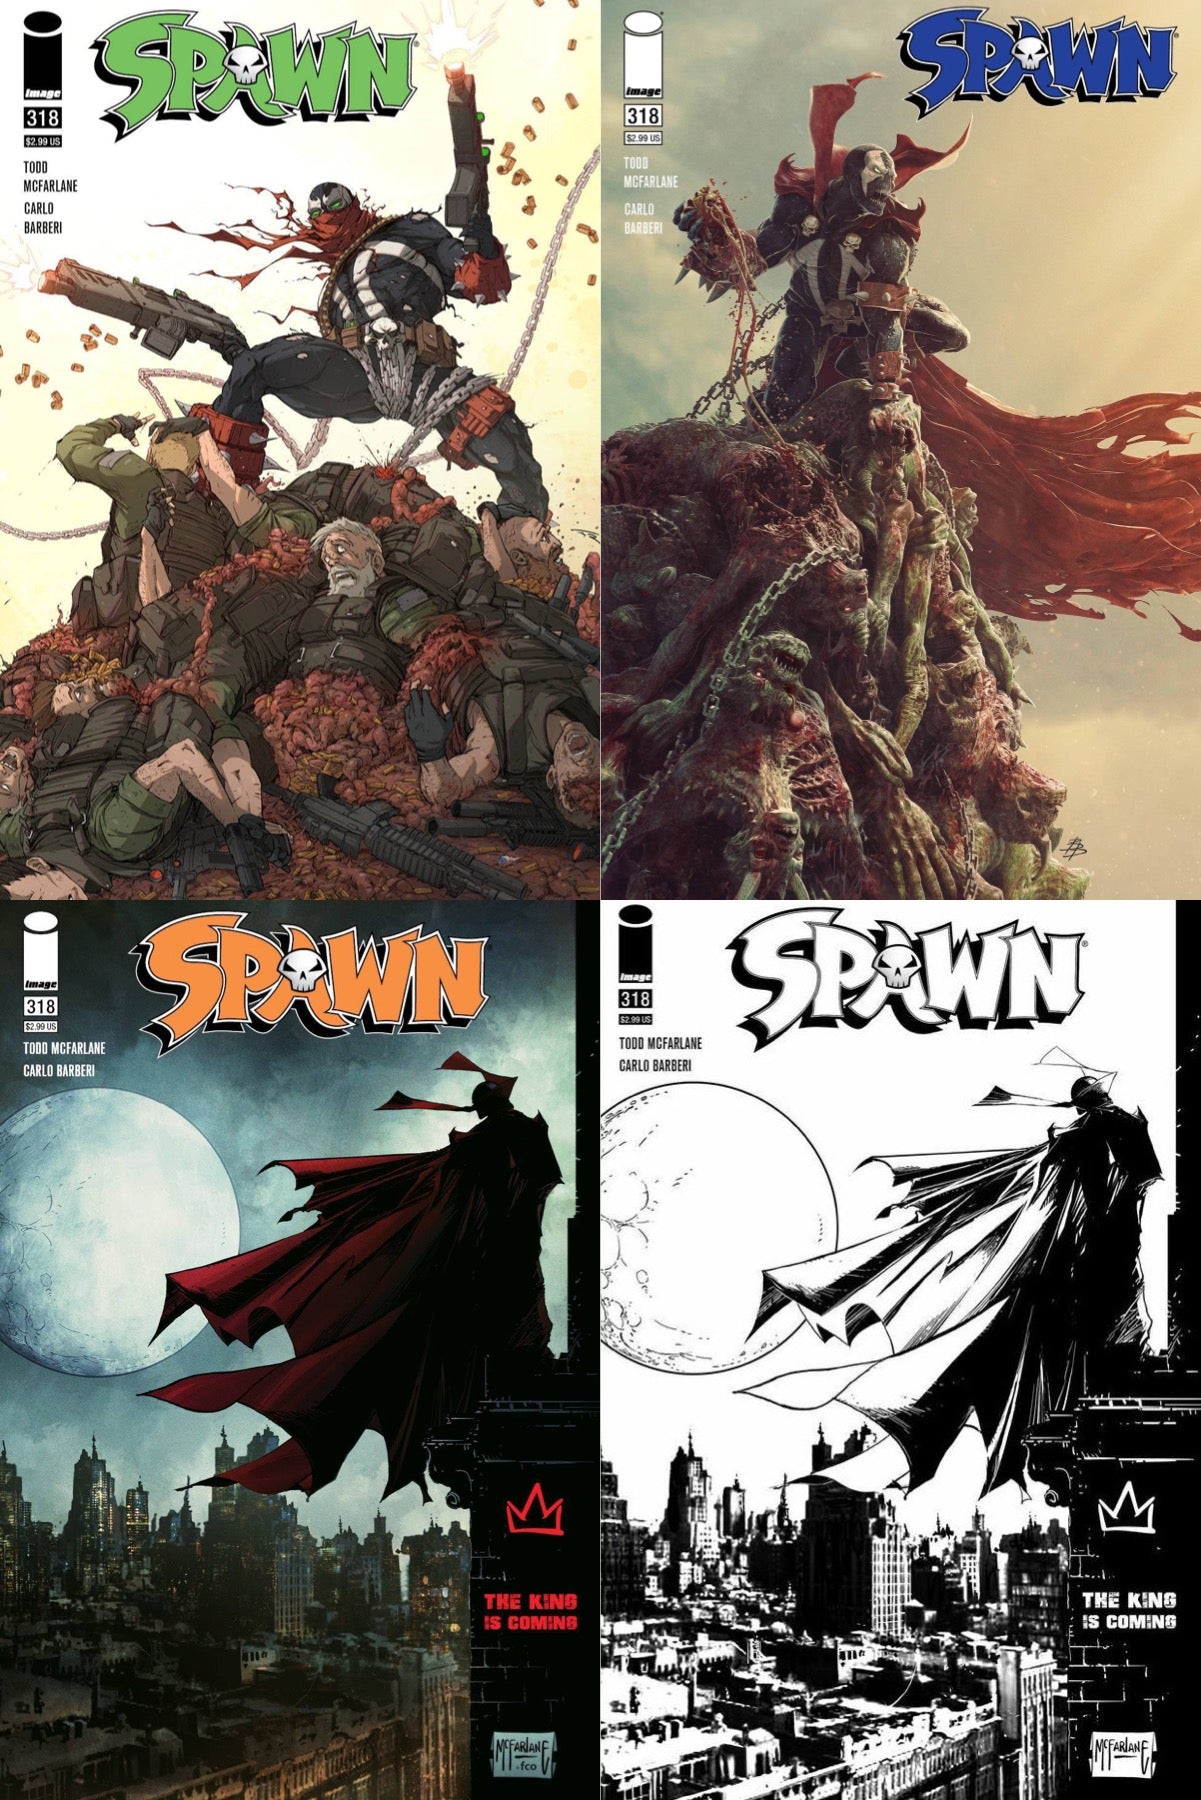 05/26/2021 SPAWN #318 4-PACK CVR A,B,C AND 1:5 VARIANT